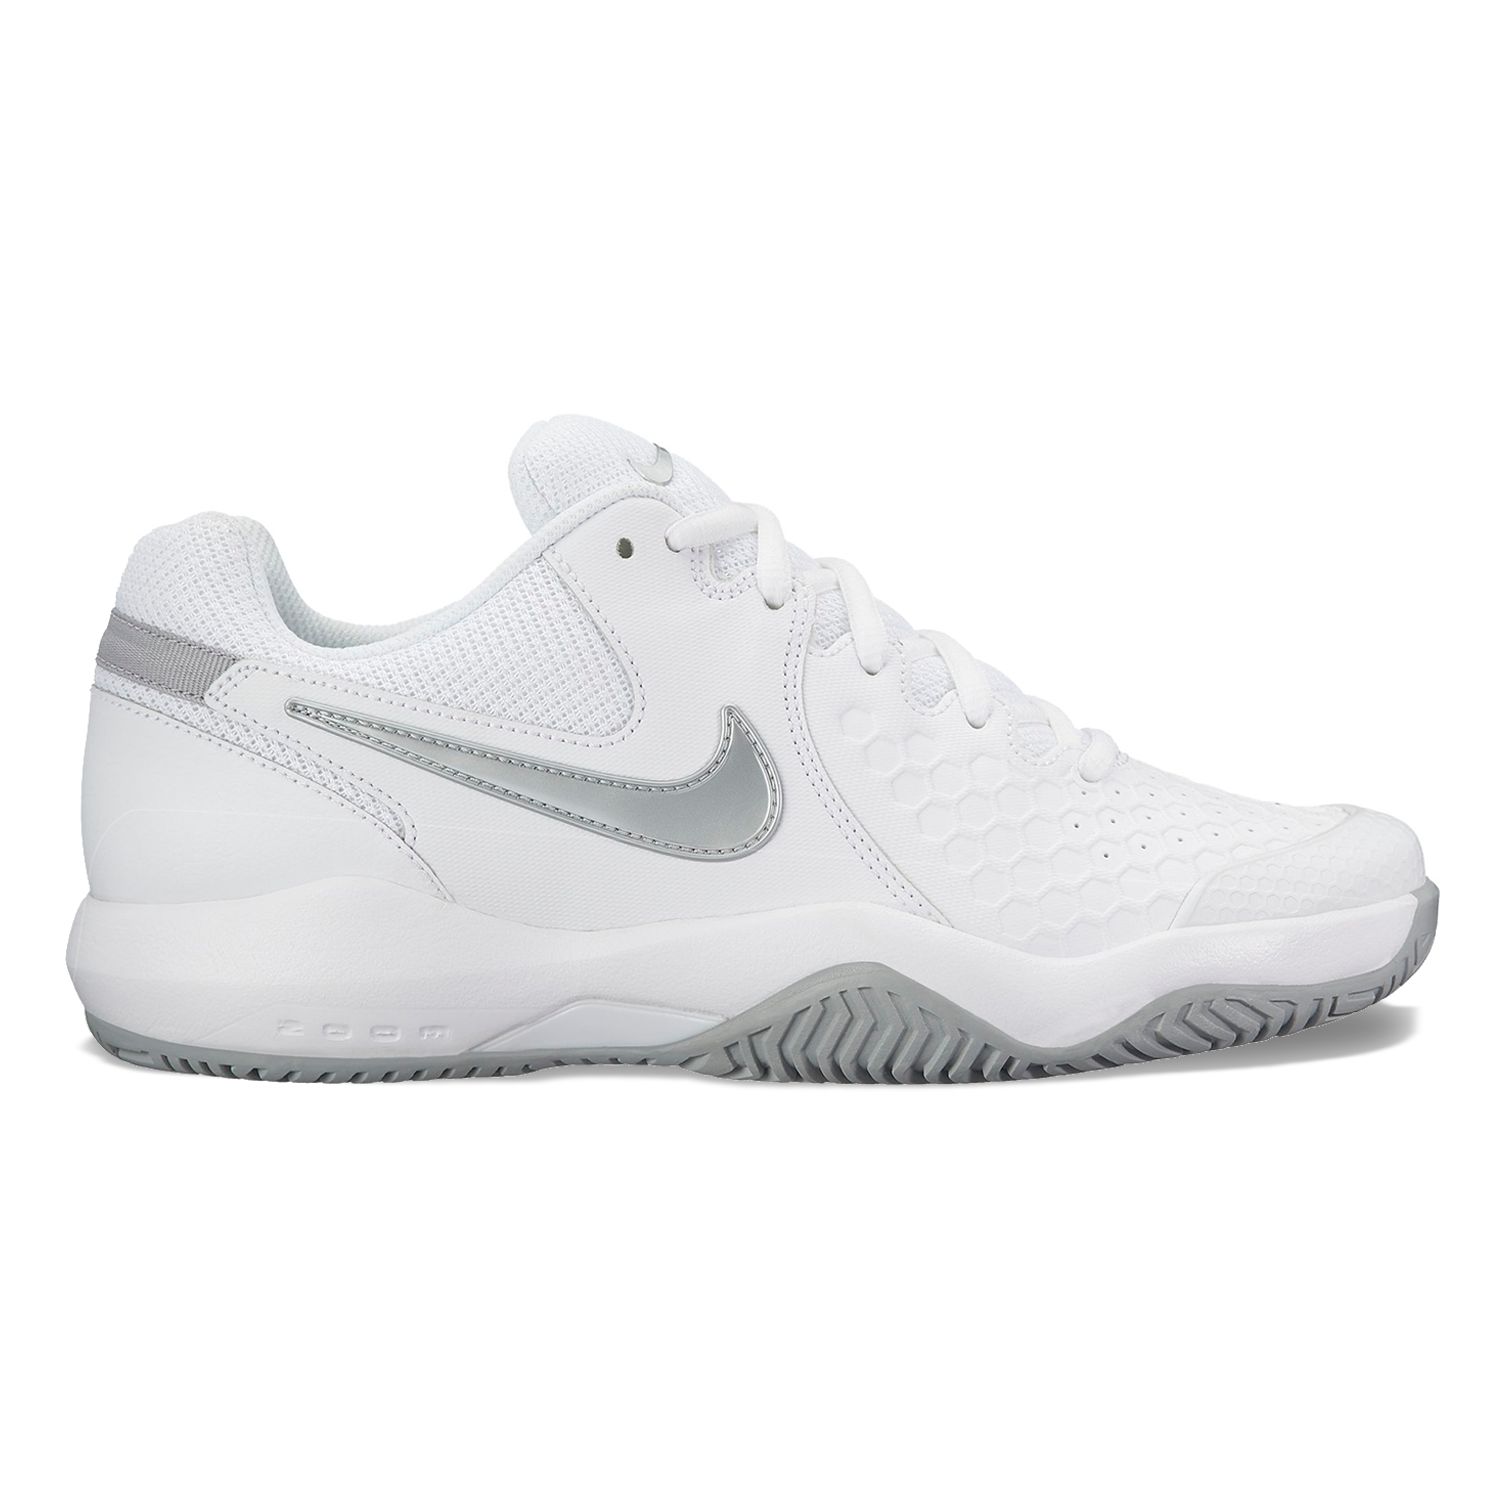 air zoom resistance tennis shoes